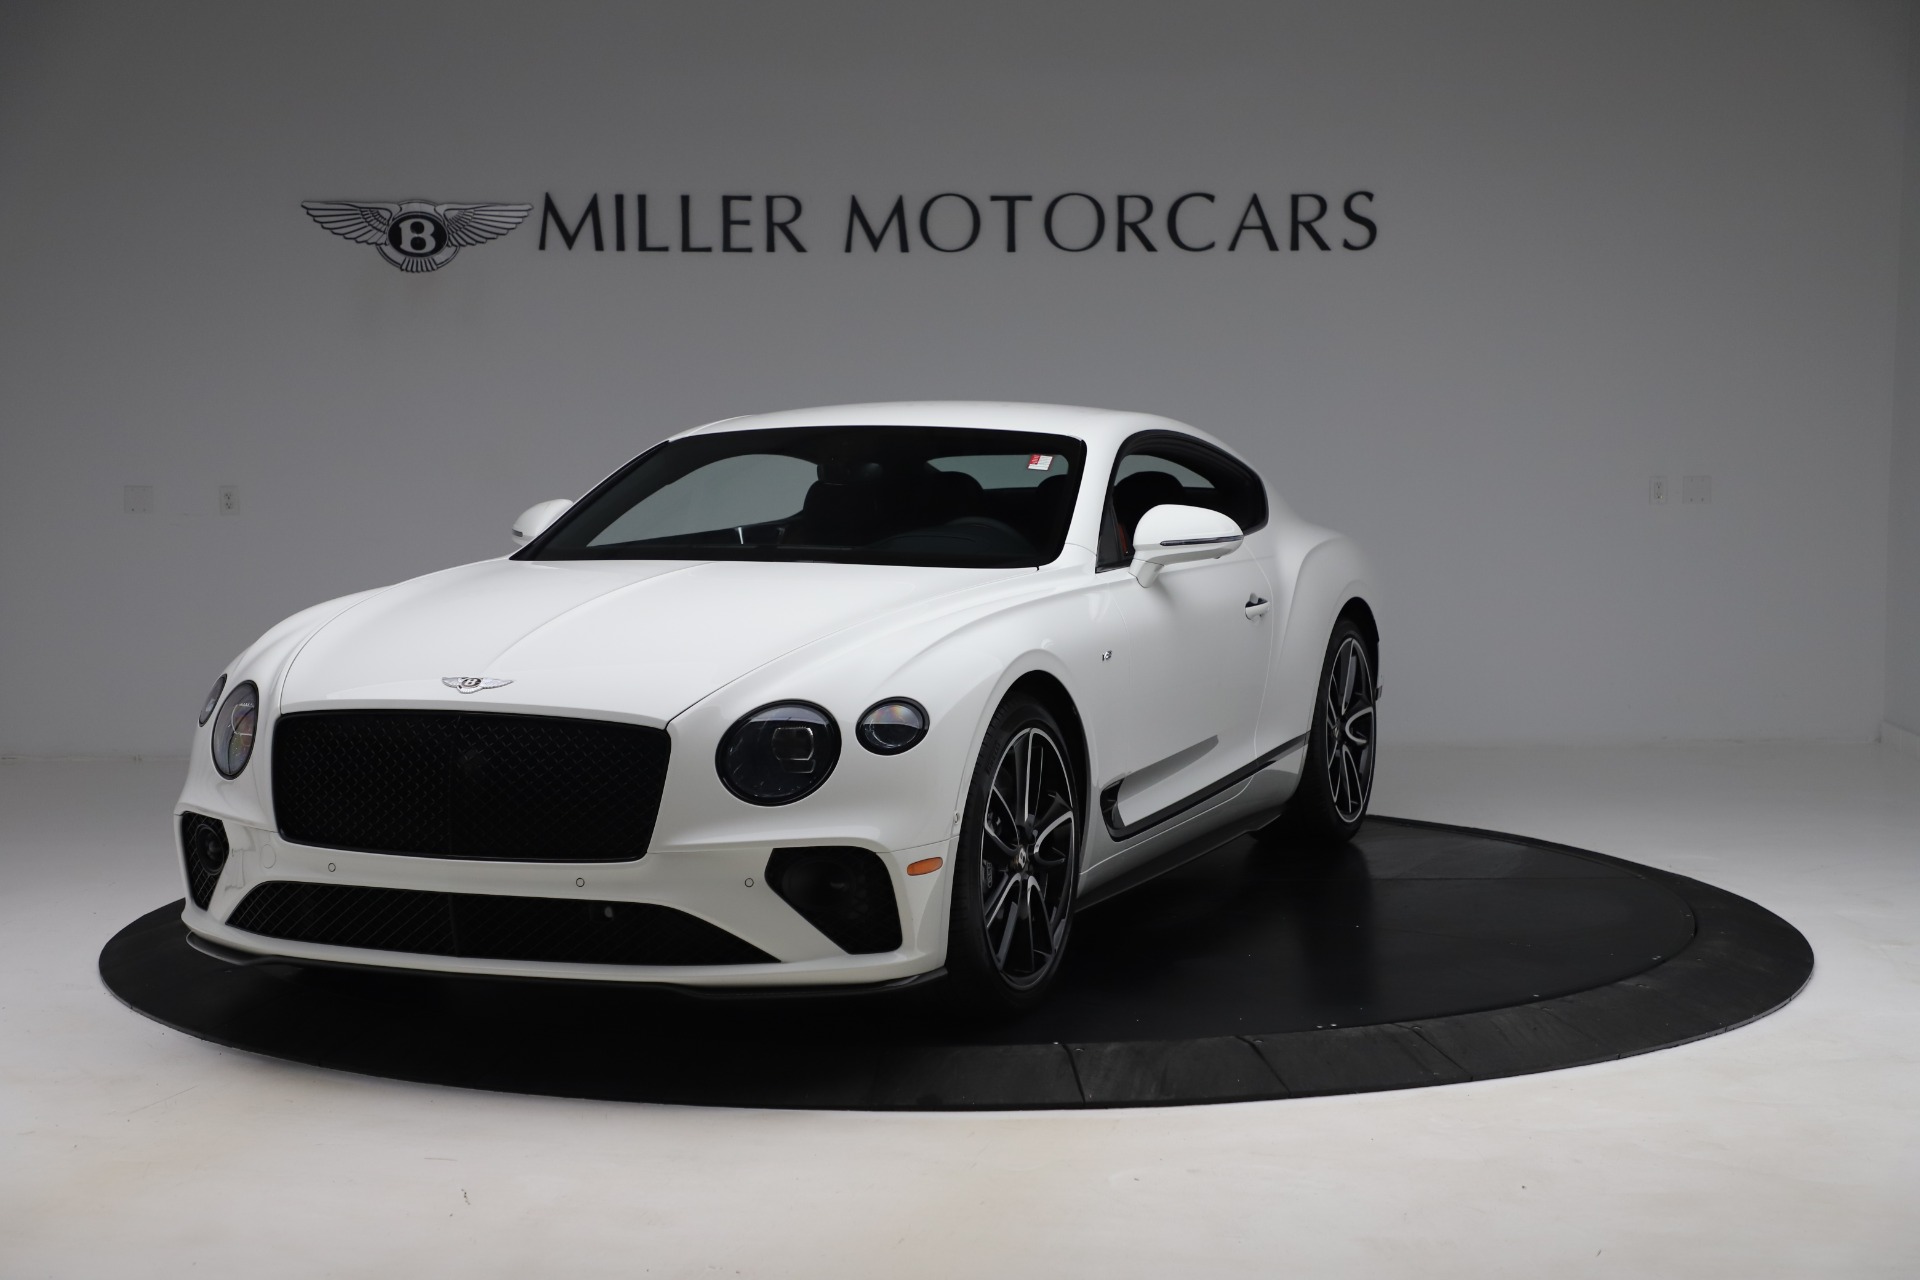 New 2020 Bentley Continental GT V8 for sale Sold at Maserati of Westport in Westport CT 06880 1